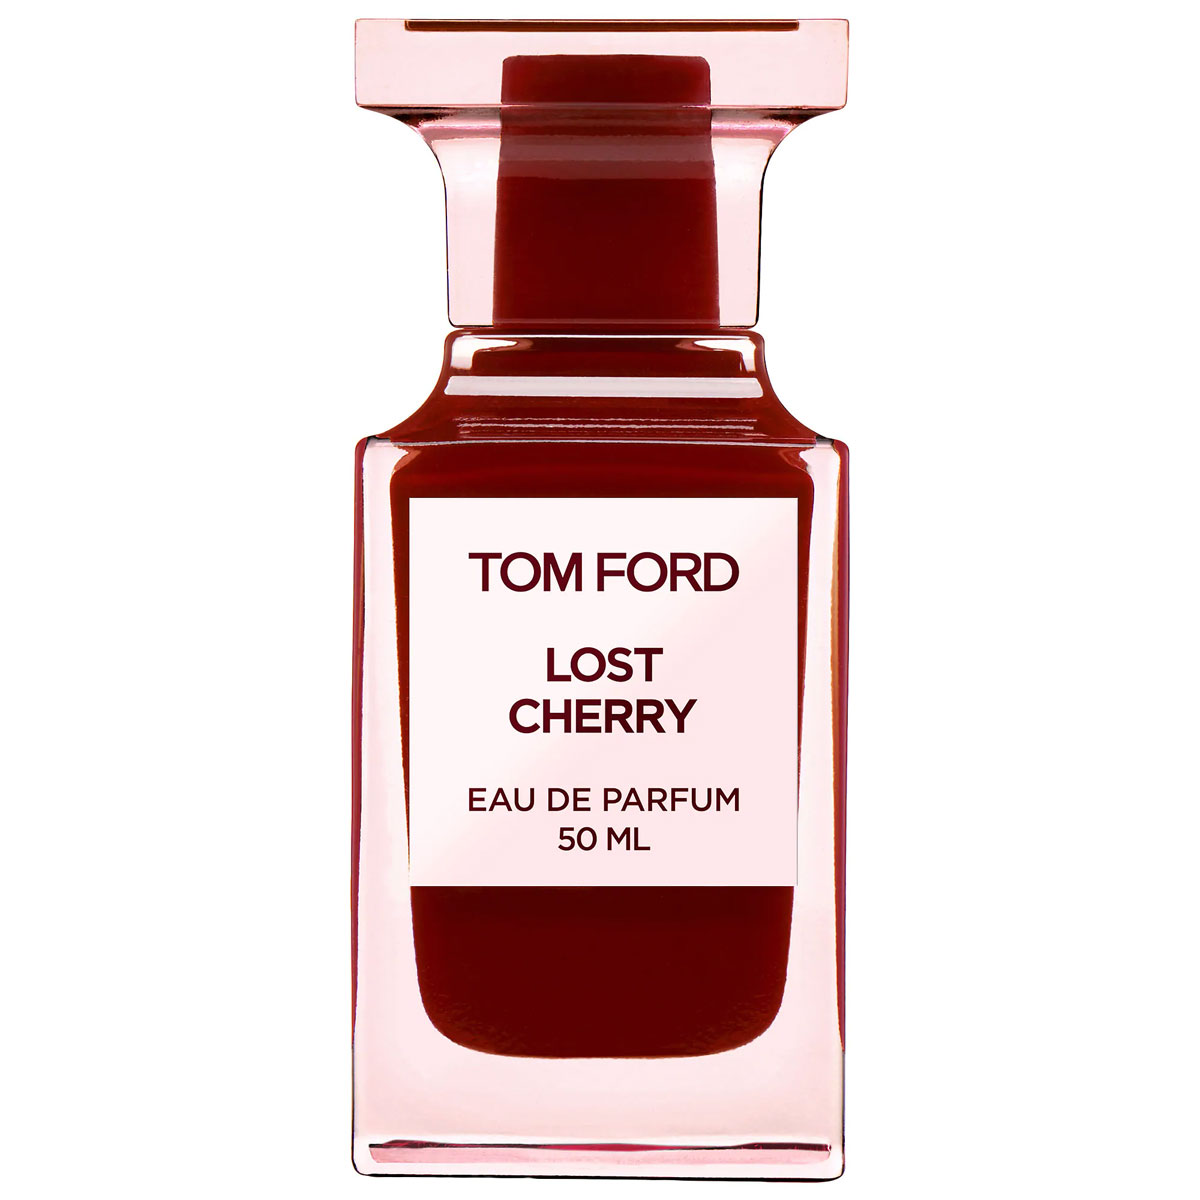 Top 91+ imagen tom ford perfume lost cherry